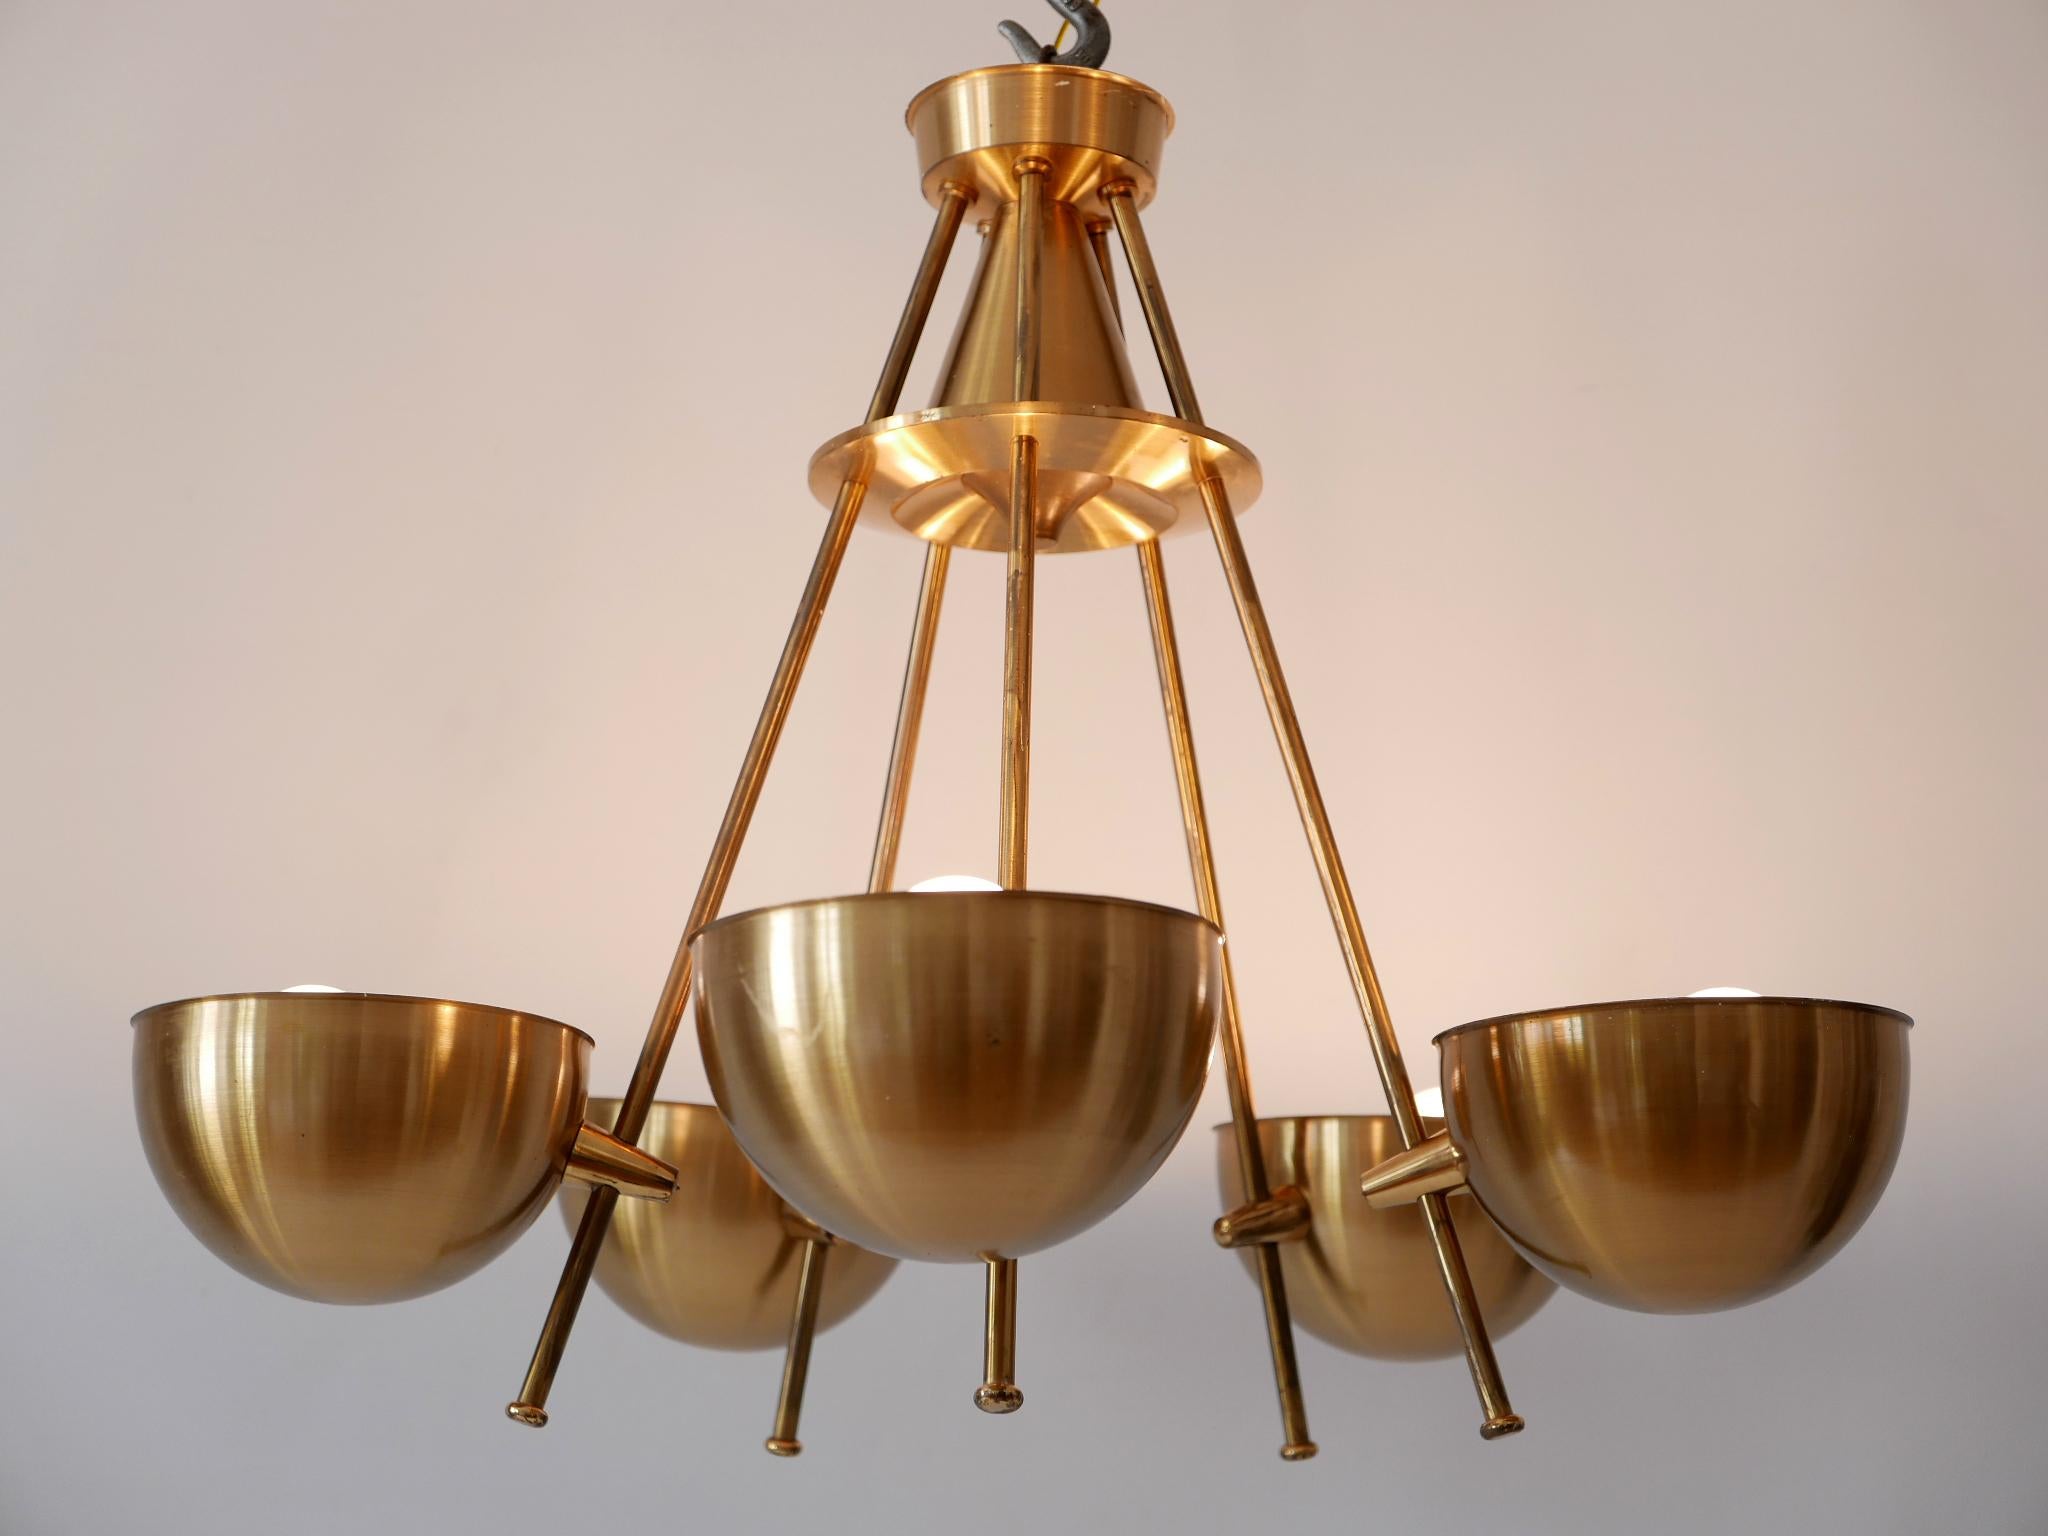 Extremely rare, lovely and highly decorative Mid-Century Modern five-flamed pendant lamp or chandelier. Designed and manufactured probably in Sweden, 1950s.

Executed in brass, the pendant lamp / chandelier comes with 5 x E27 / E26 Edison screw fit